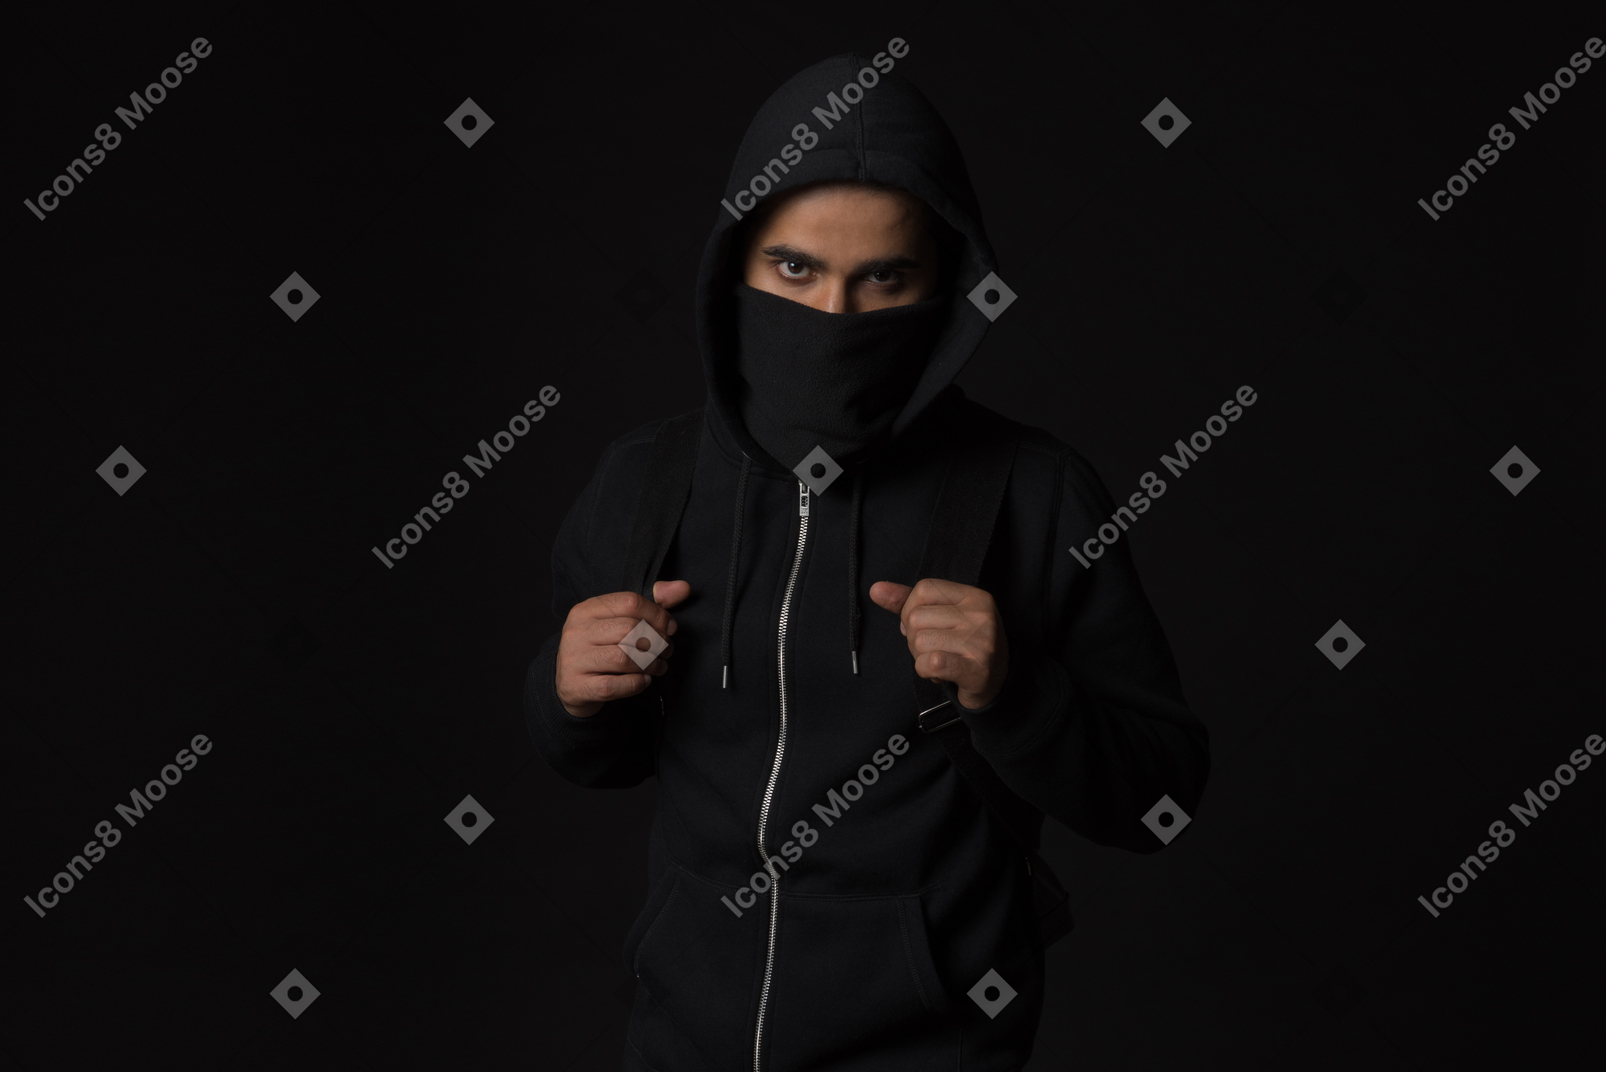 Hacker guy with covered face standing in the dark